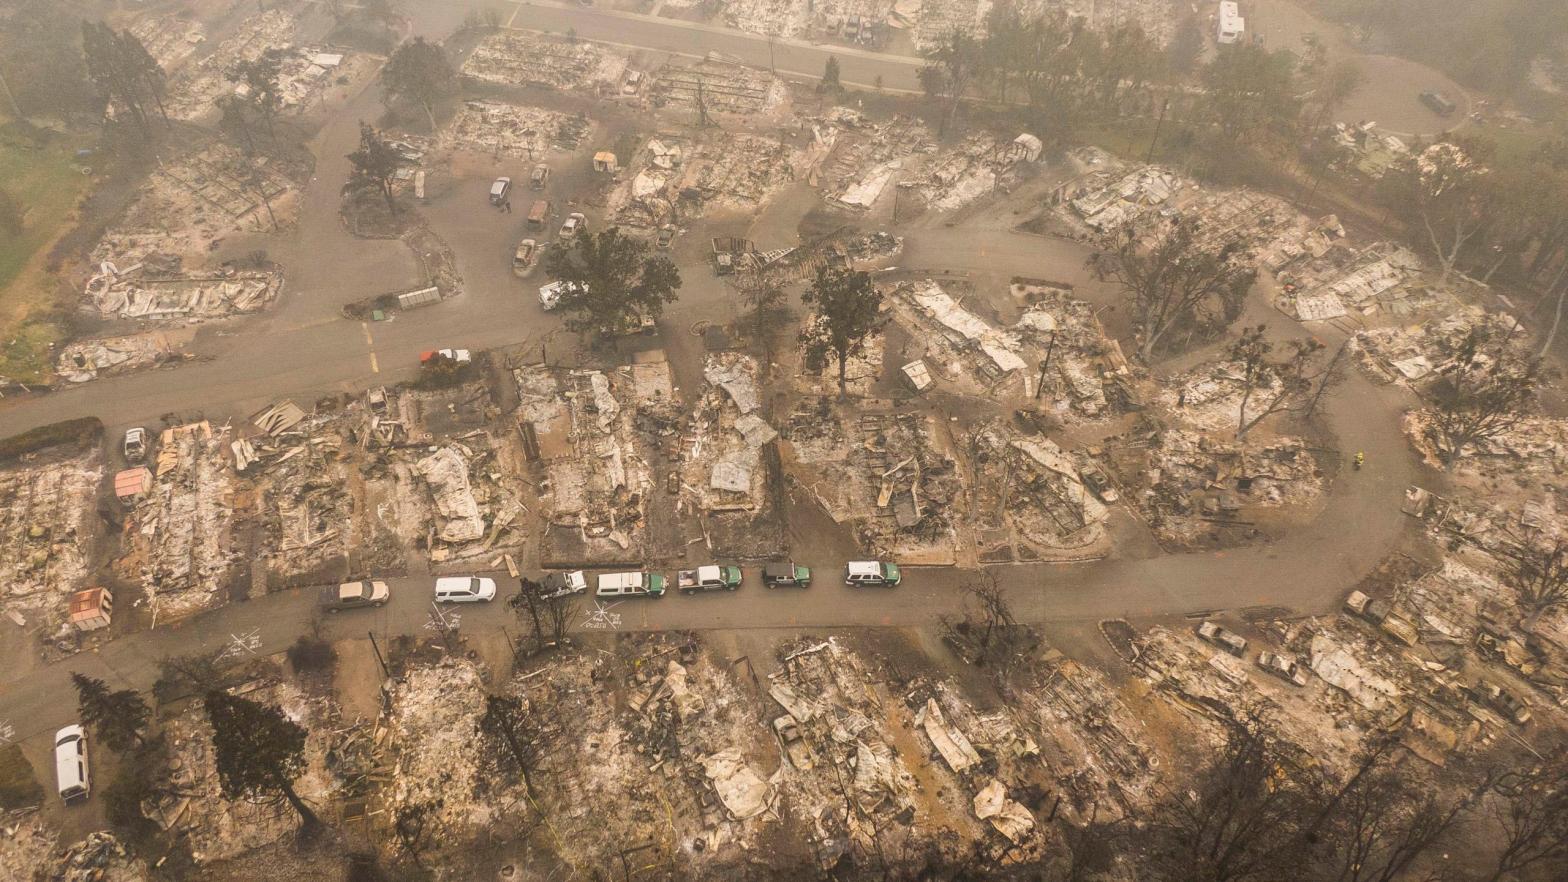 Search and rescue vehicles from the Jackson County Sheriff's Office are seen in a mobile home park that was destroyed by wildfire in Ashland, Oregon. (Photo: David Ryder, Getty Images)